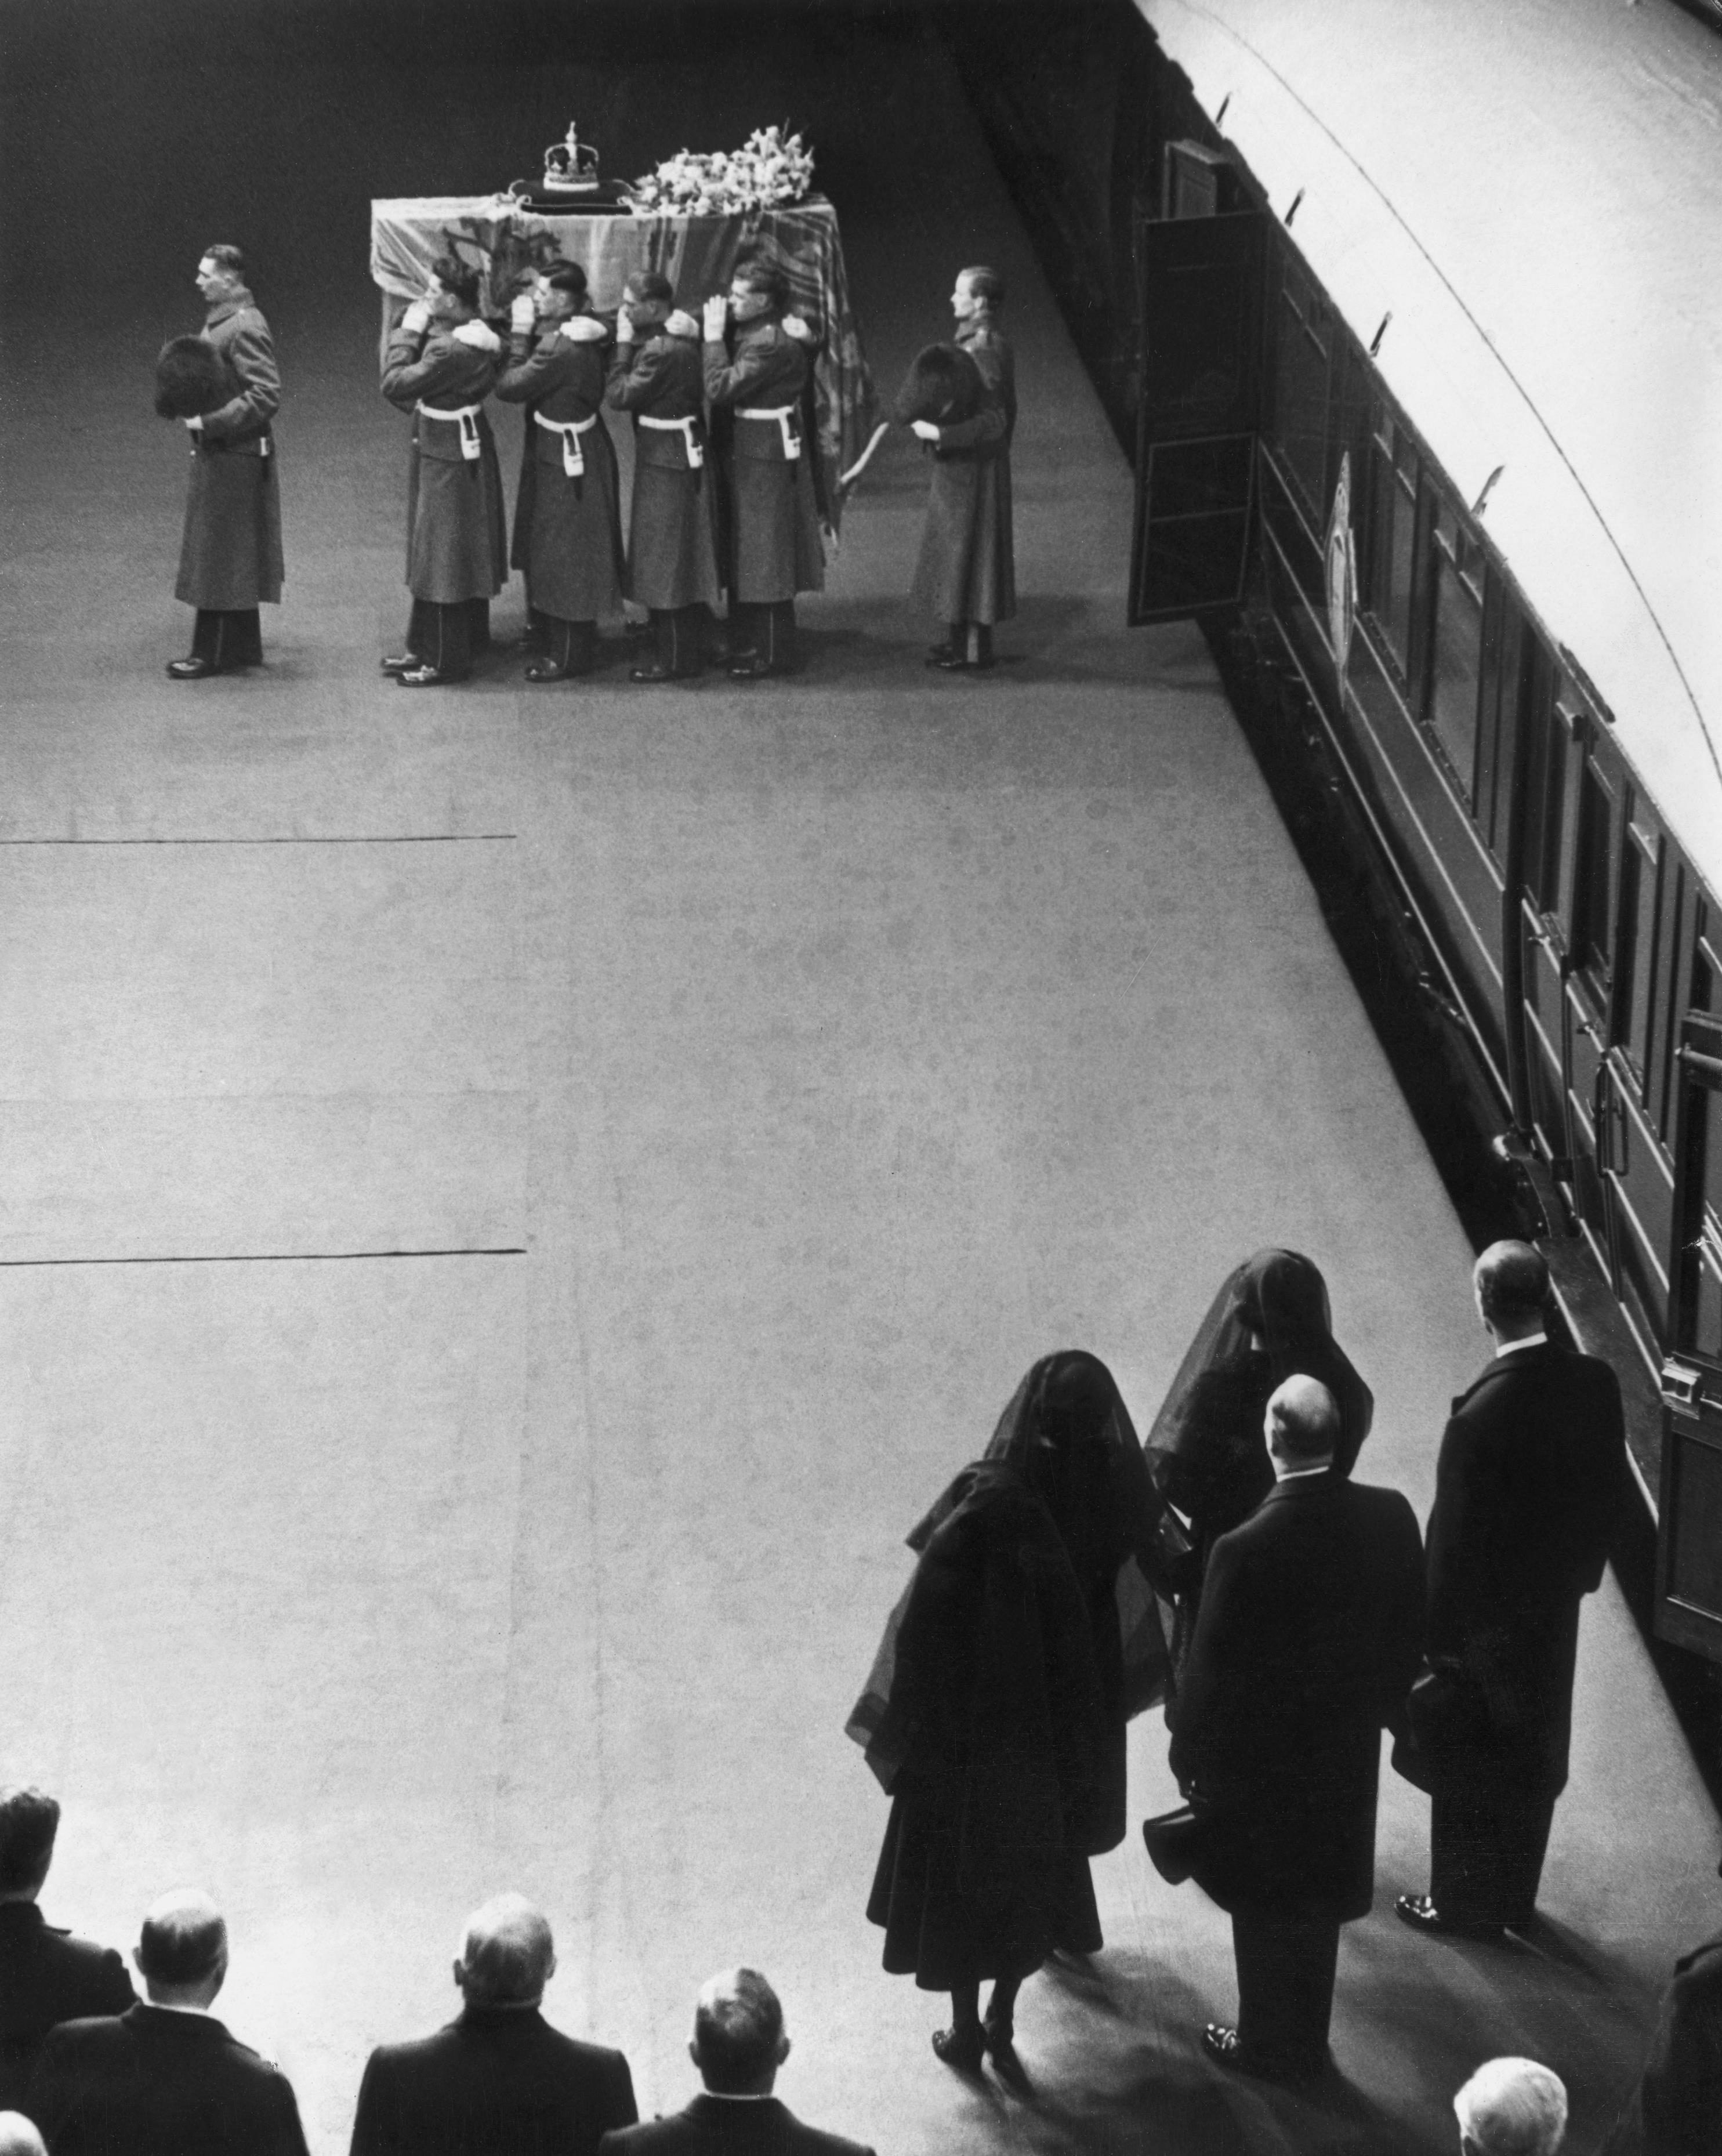 <p>On Feb. 11, 1952, newly widowed Queen Elizabeth (who took the name Queen Elizabeth the Queen Mother), daughters Queen Elizabeth II -- the new monarch -- and Princess Margaret and son-in-law Prince Philip watched as King George VI's coffin was carried from a train before traveling to Westminster Hall in London where he lay in state for several days before being taken to Windsor, England, for his funeral at St. George's Chapel at Windsor Castle on Feb. 15. </p><p>King George VI -- who was previously known as Prince Albert, Duke of York before he took the throne following his brother King Edward VIII's abdication -- died on Feb. 6, 1952, at Sandringham House in Norfolk, England, from a blood clot after years of ill health including a lung cancer diagnosis.</p>